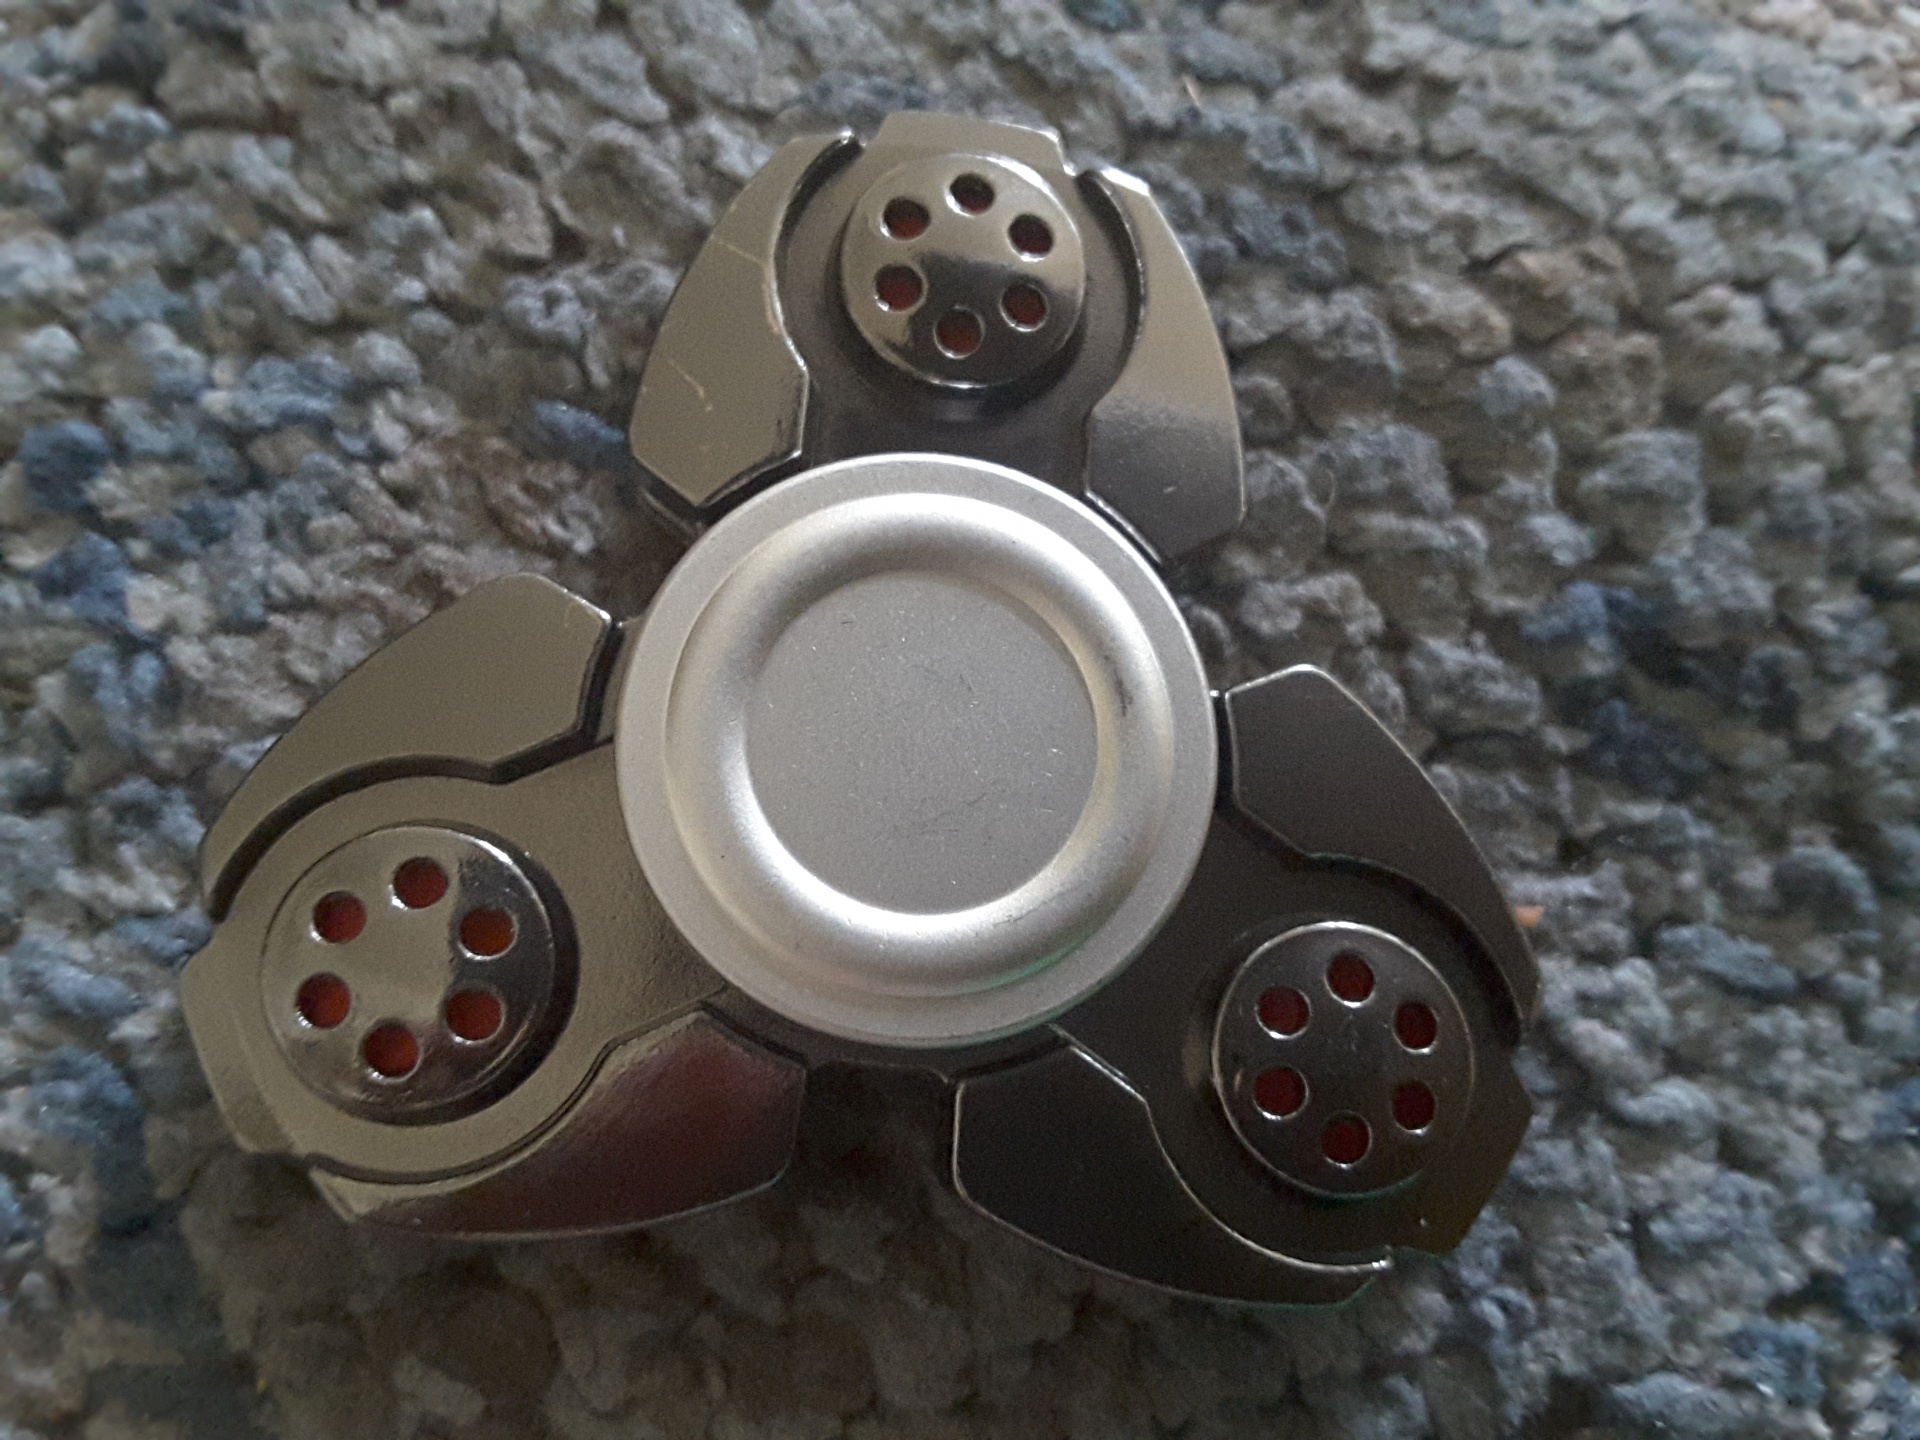 spinner spinning toy free photo